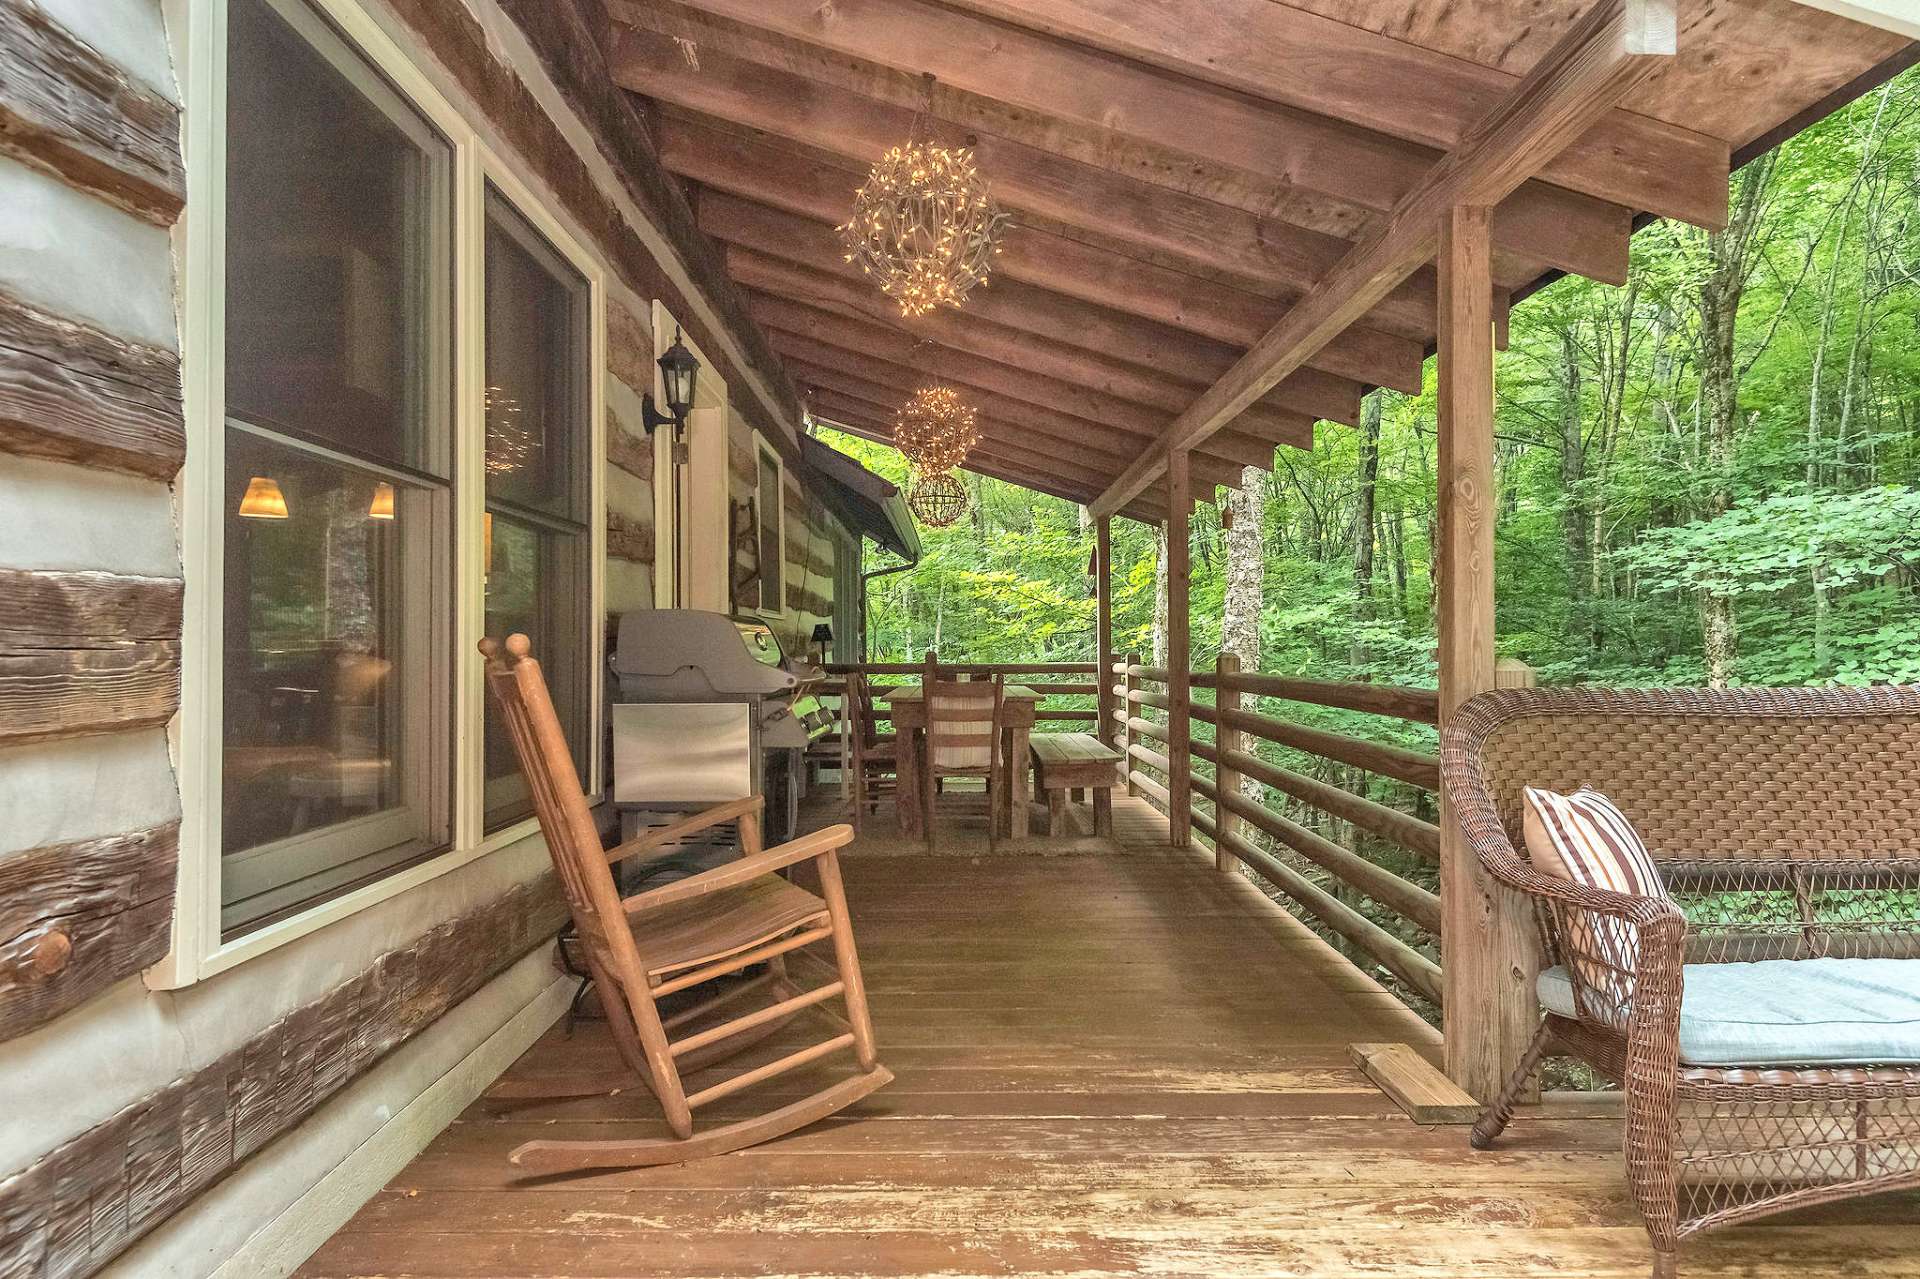 The rain won't dampen your plans to enjoy an outdoor dinner with this covered dining area.